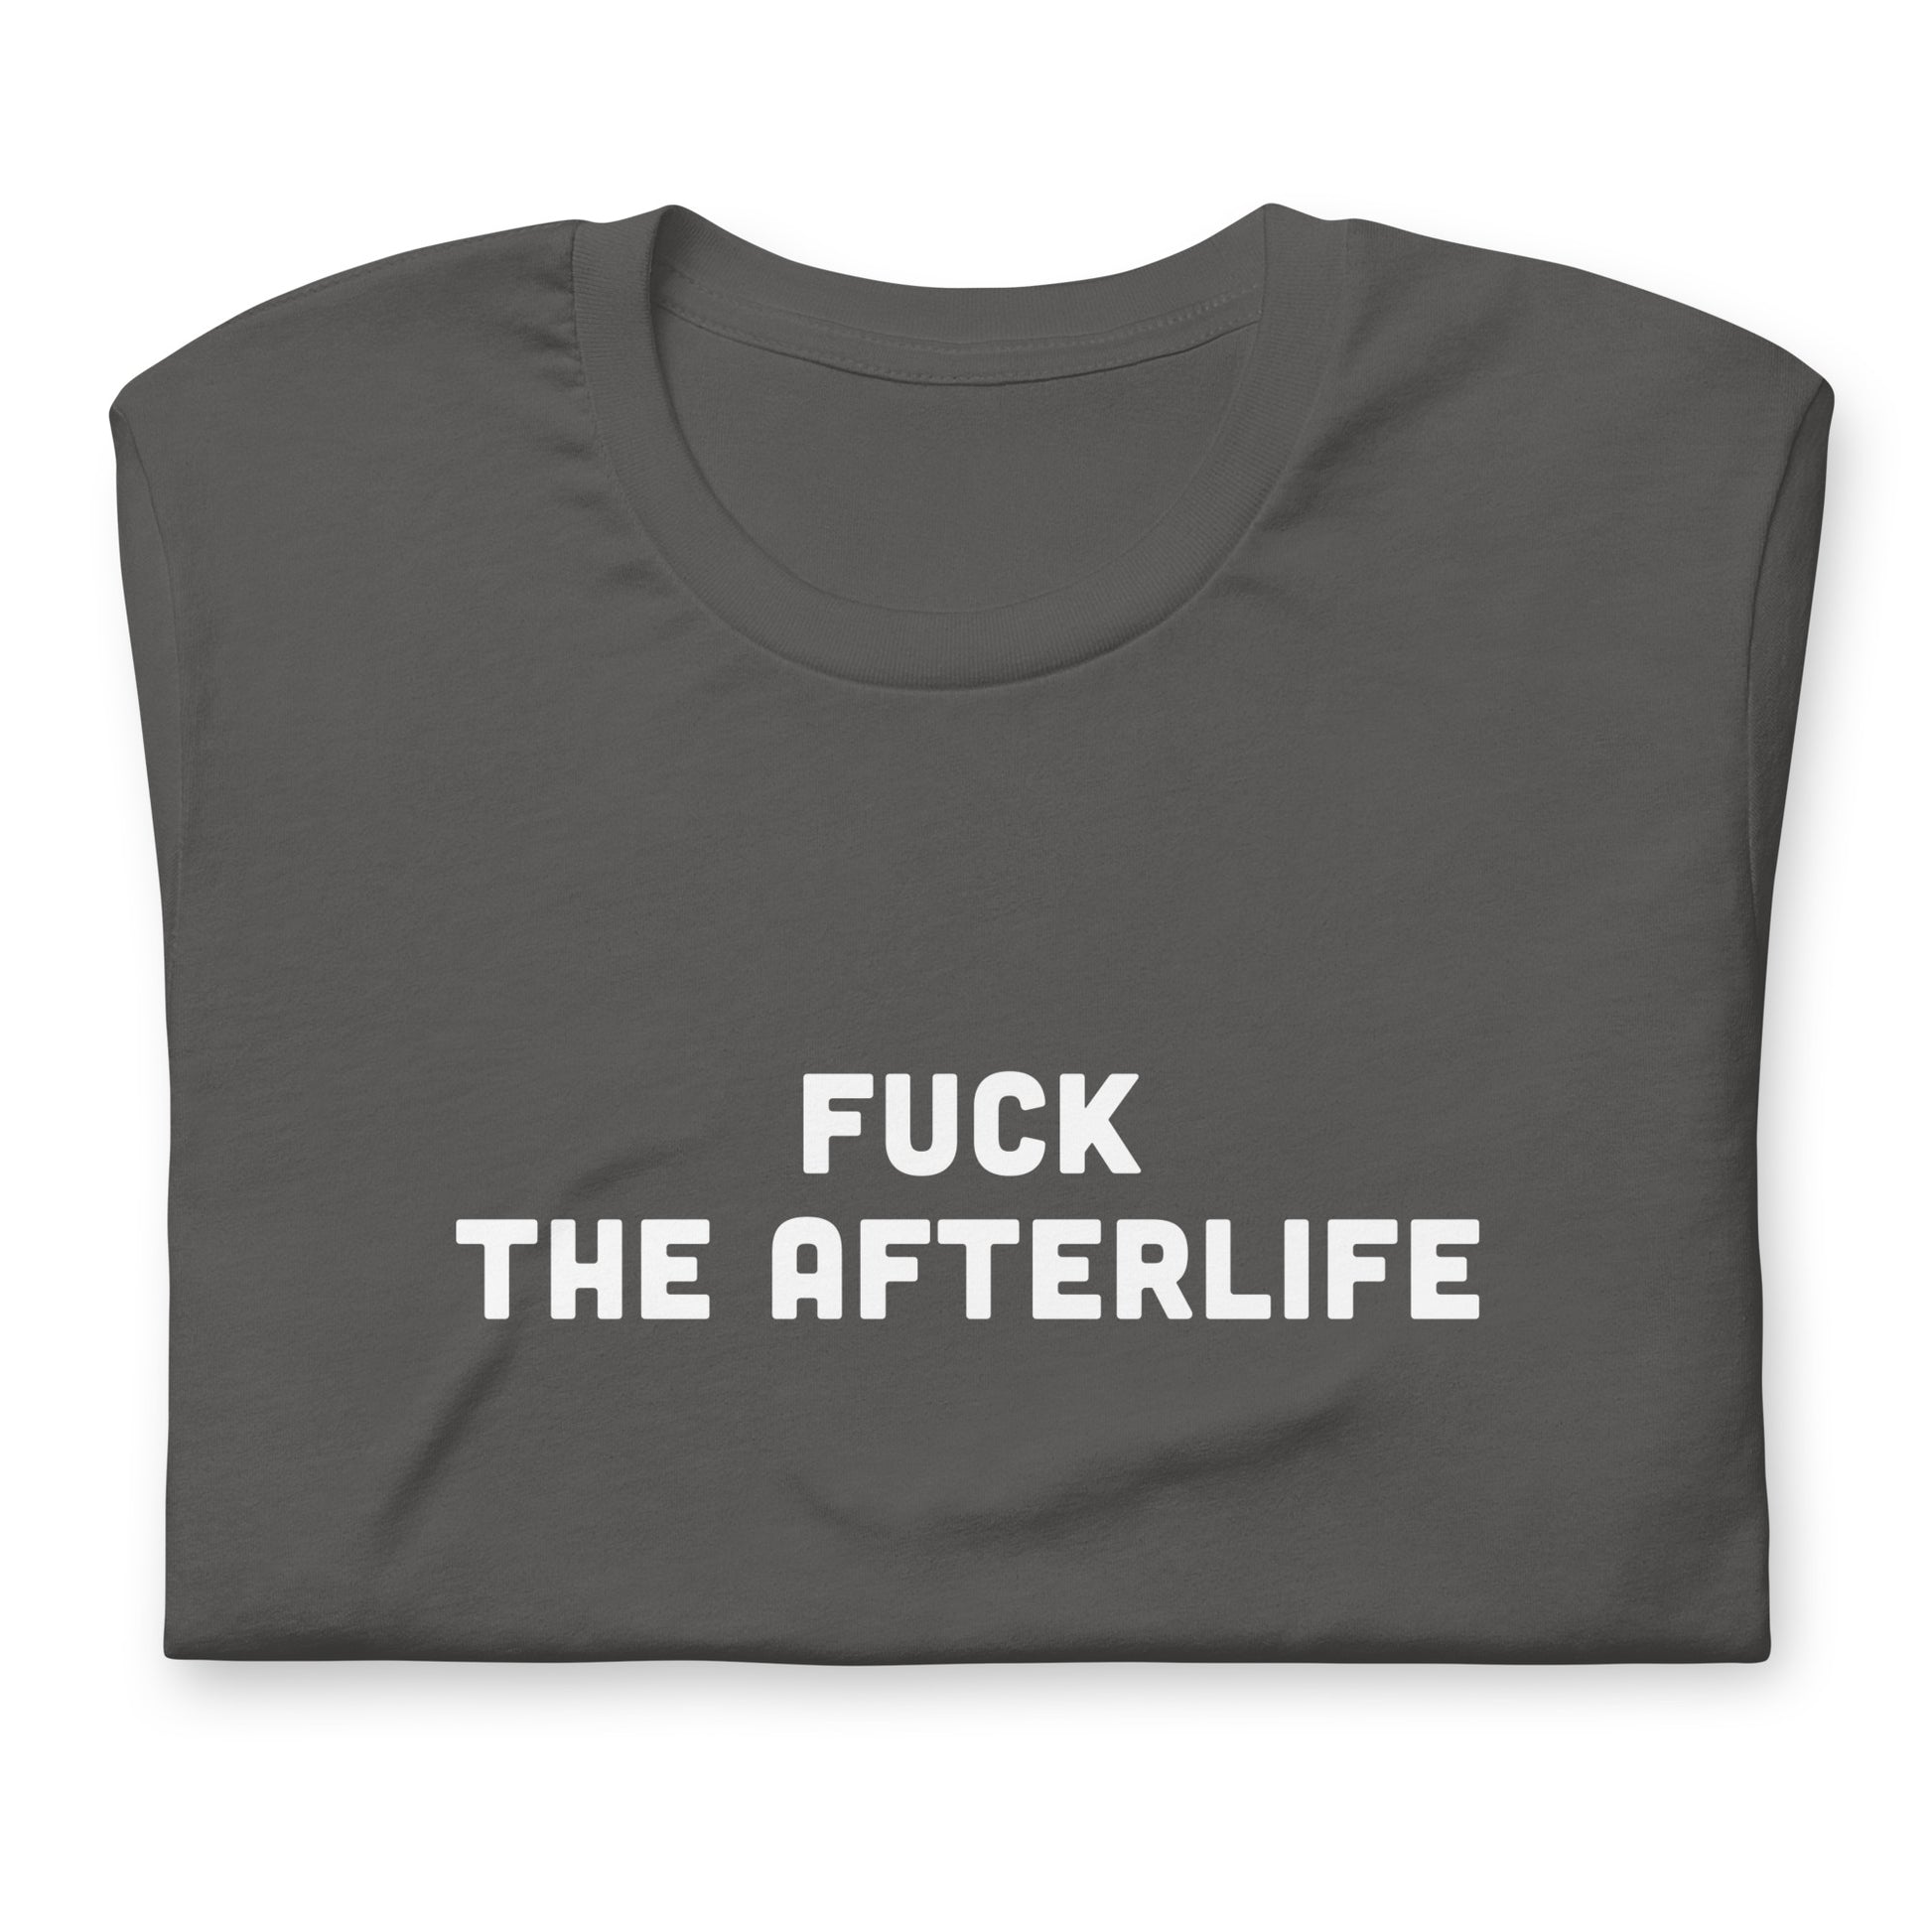 Fuck The Afterlife T-Shirt Size XL Color Black